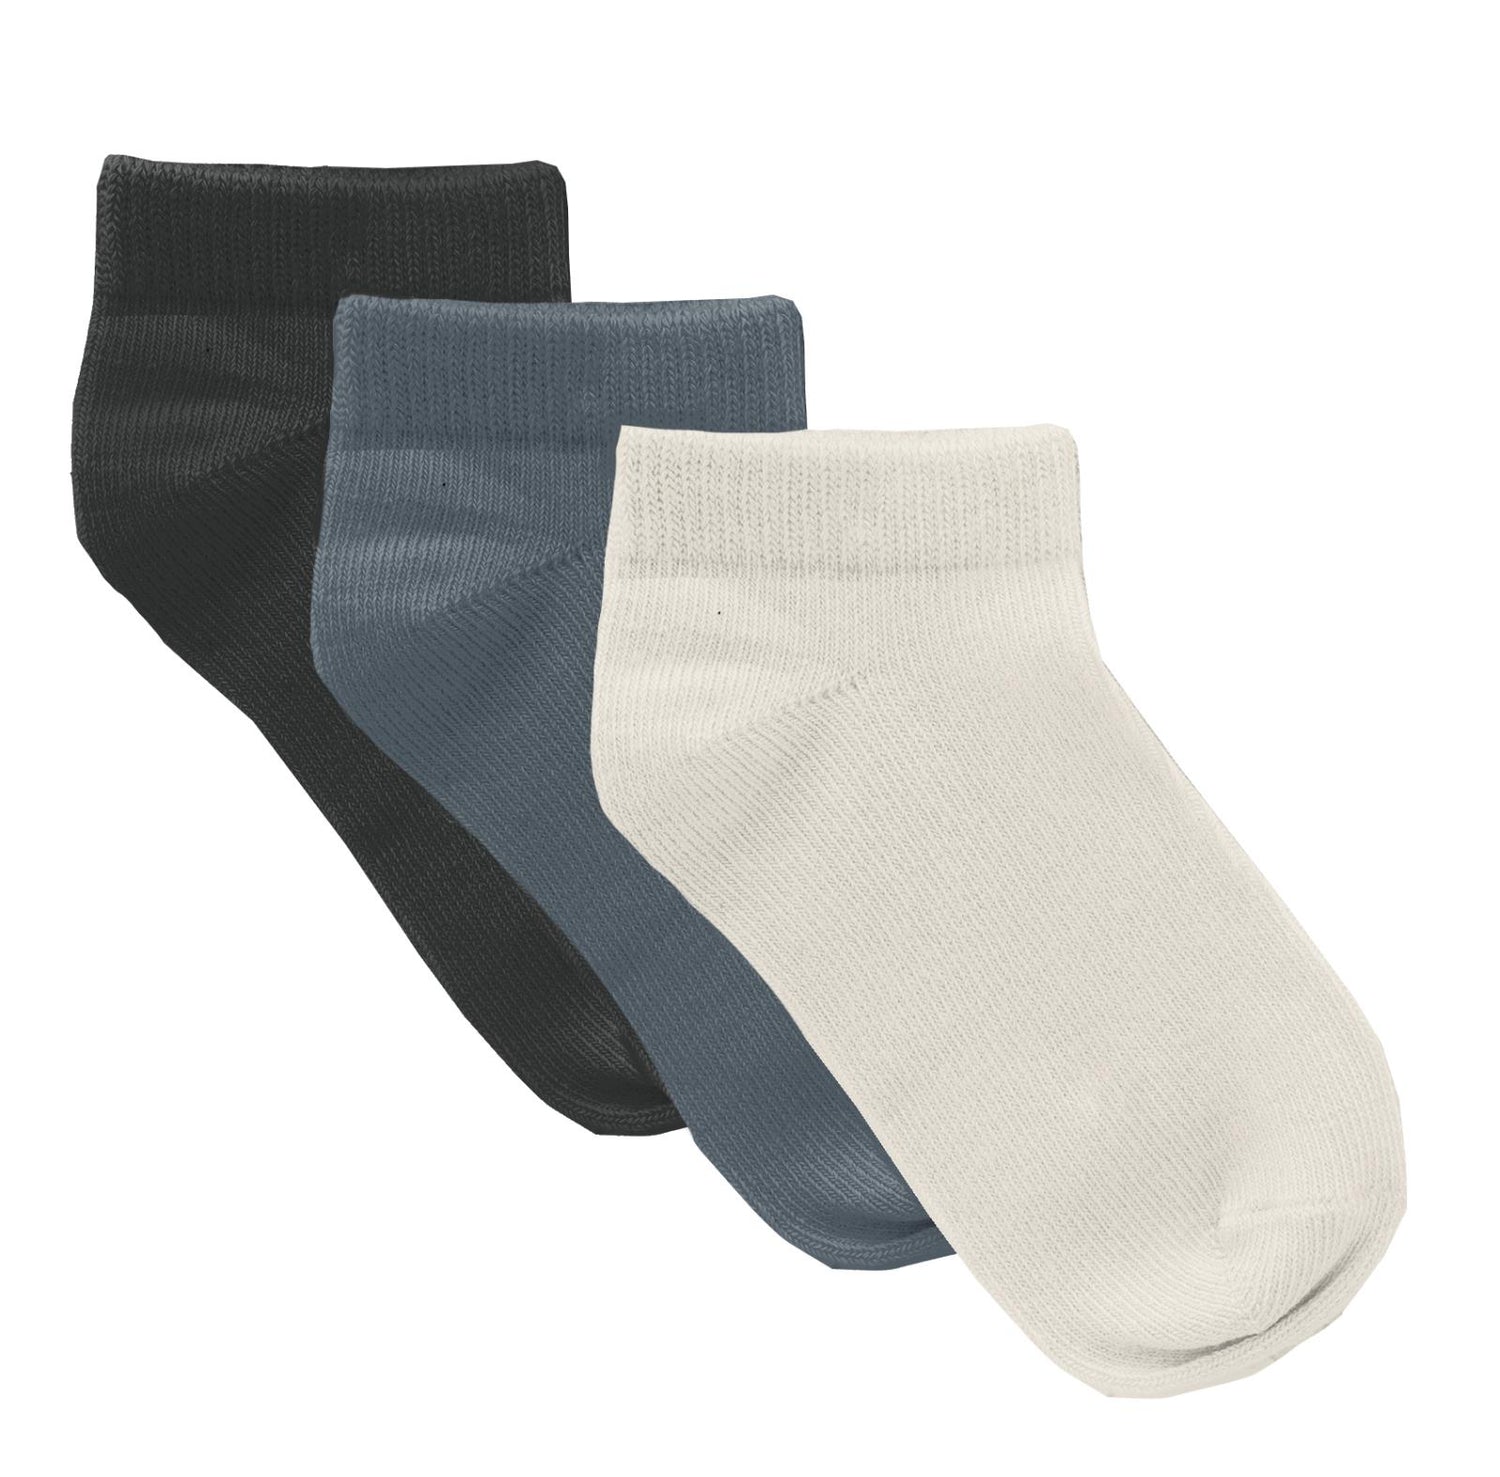 Ankle Socks Set of 3 in Natural, Midnight and Slate